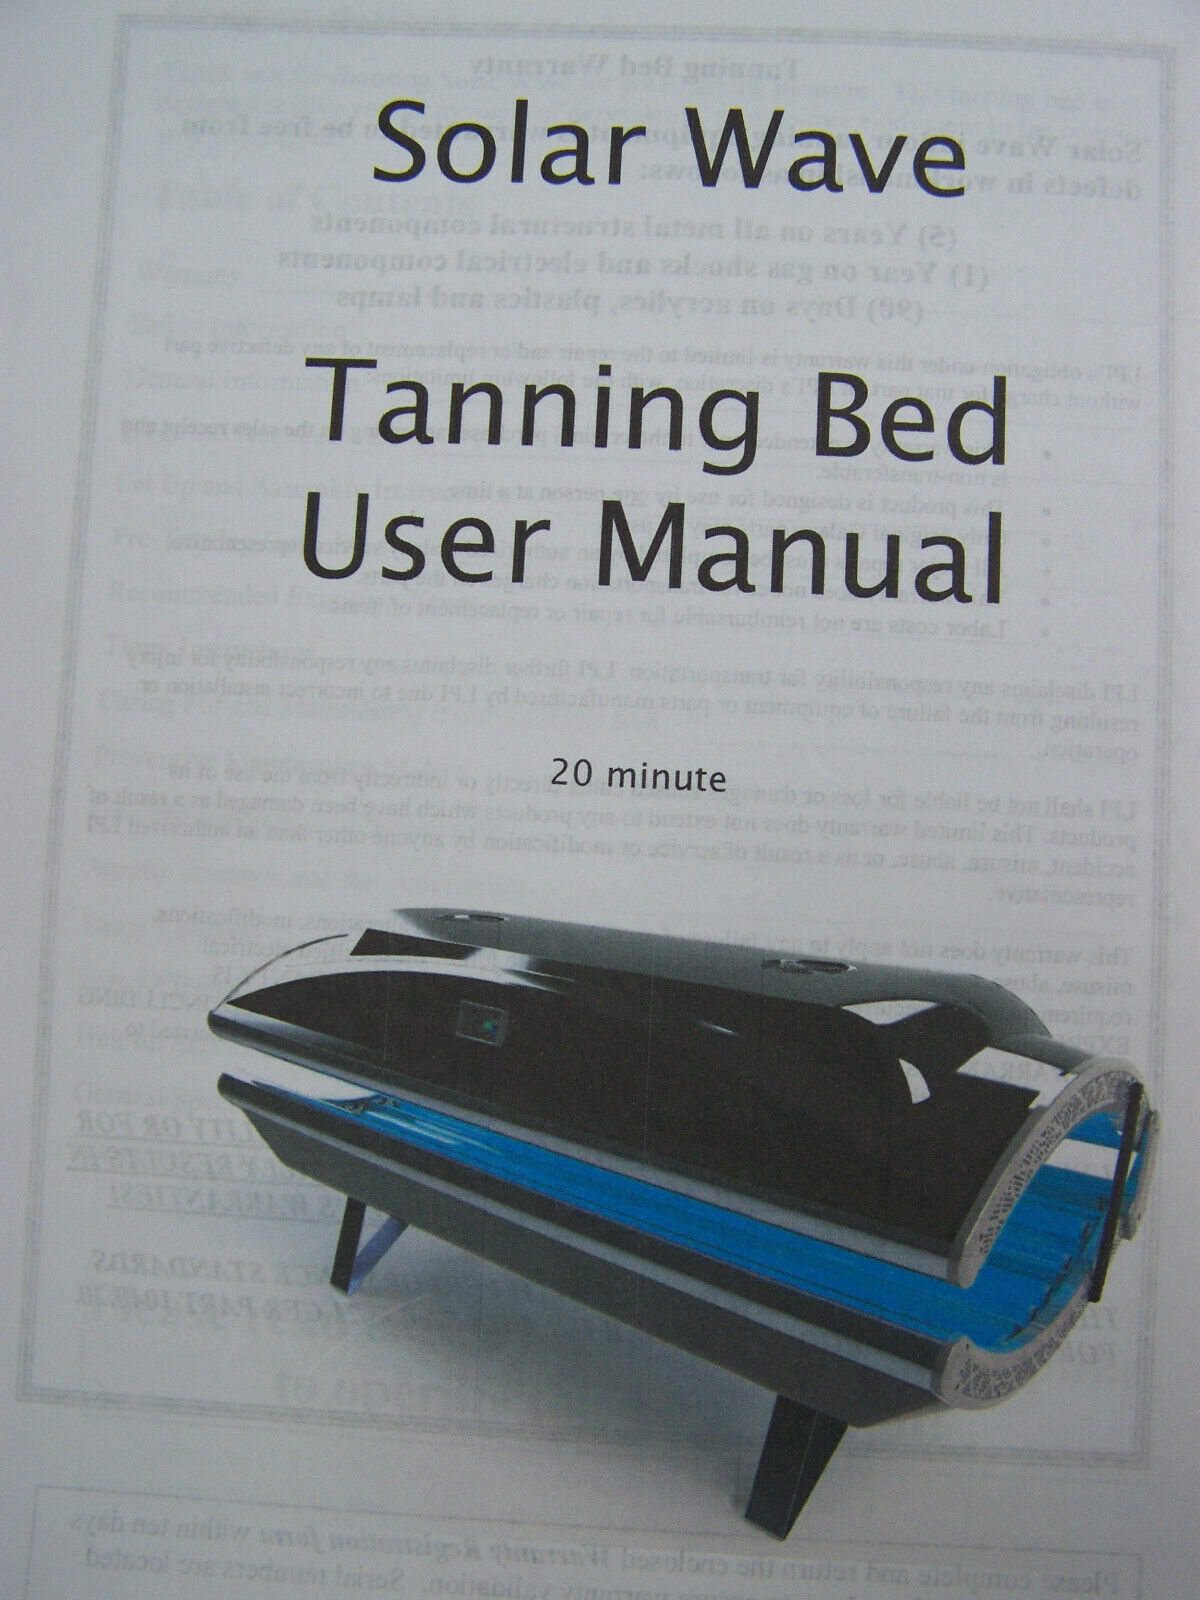 20 Minute Solar Max 84% OFF Wave User Bo Tanning Manual Max 73% OFF Operation Bed